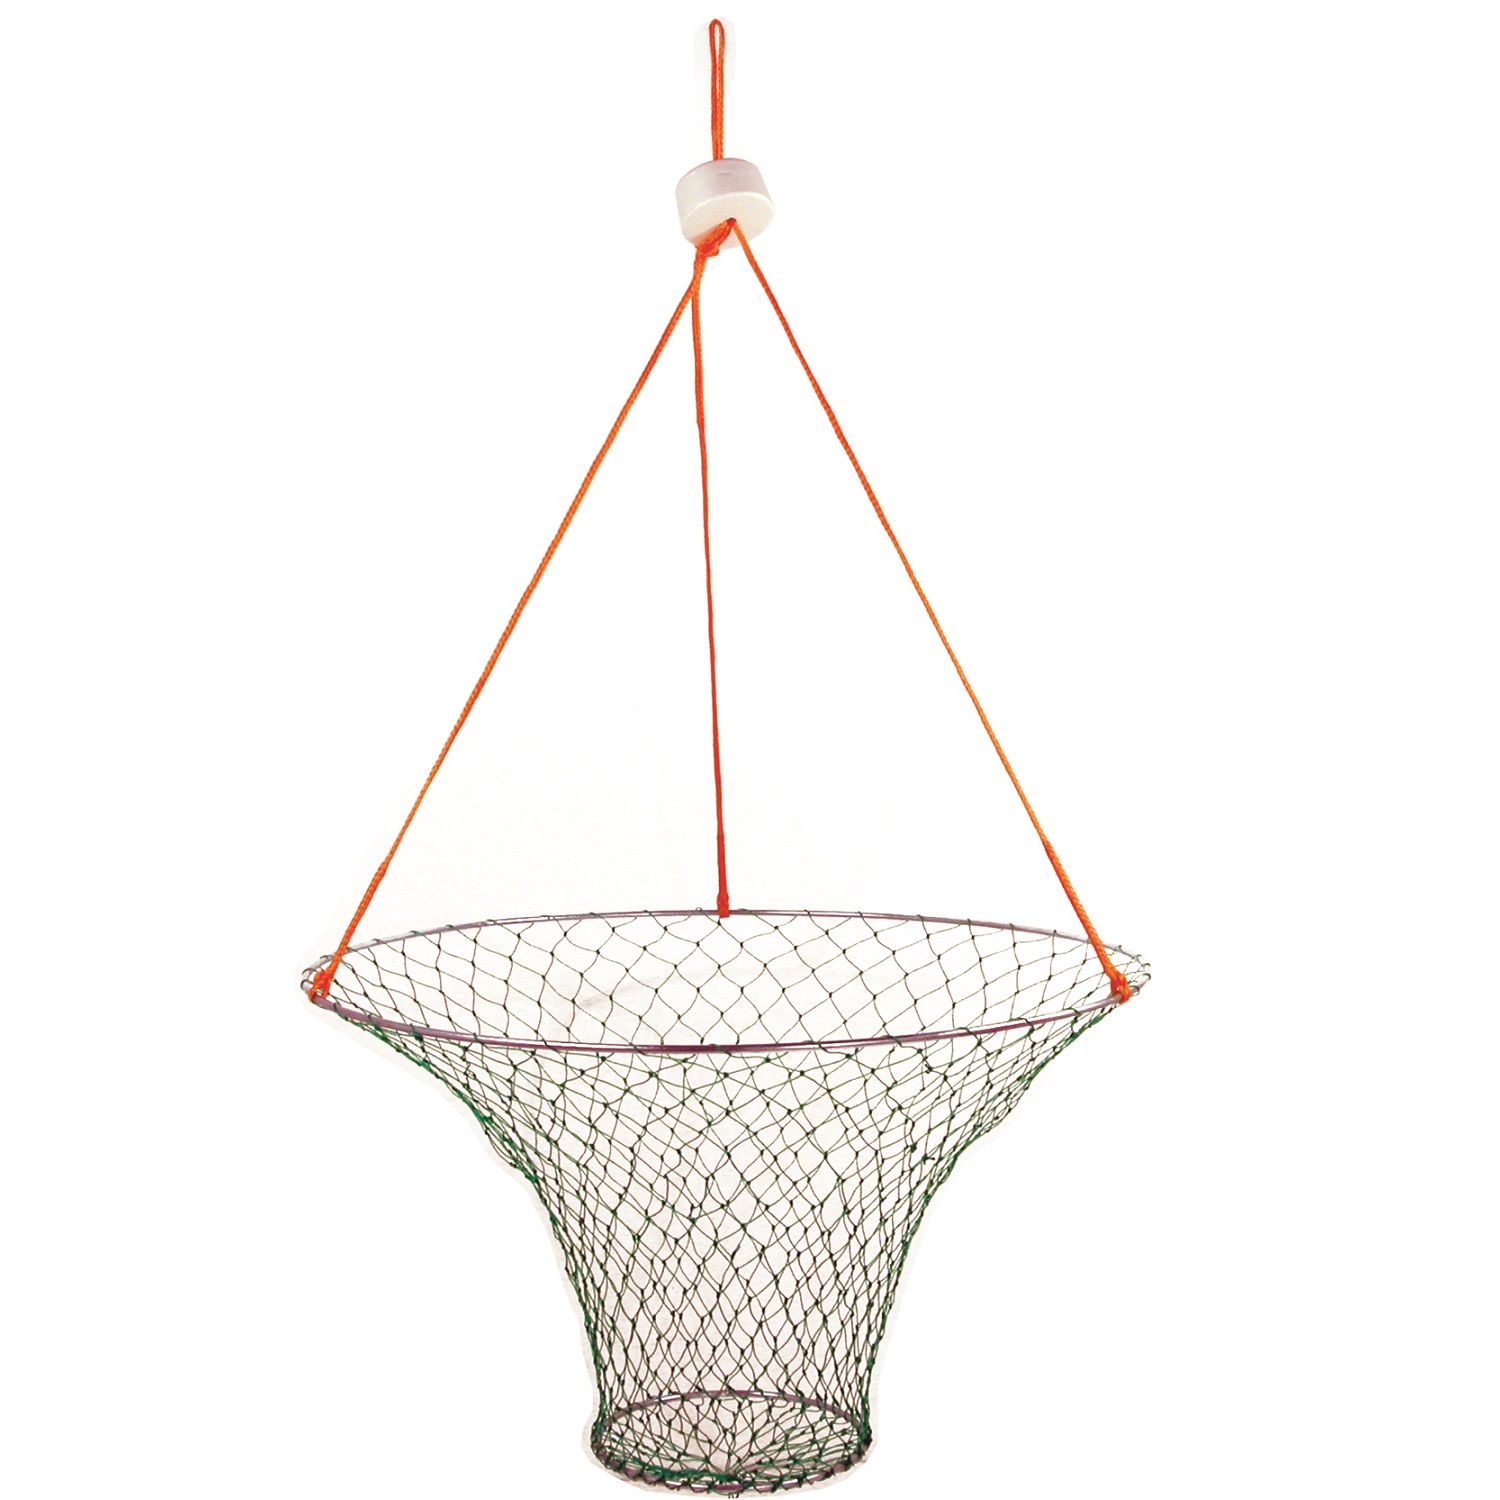 https://cs1.0ps.us/original/opplanet-danielson-30inx15in-promotional-pacific-crab-net-and-harness-4012996-main